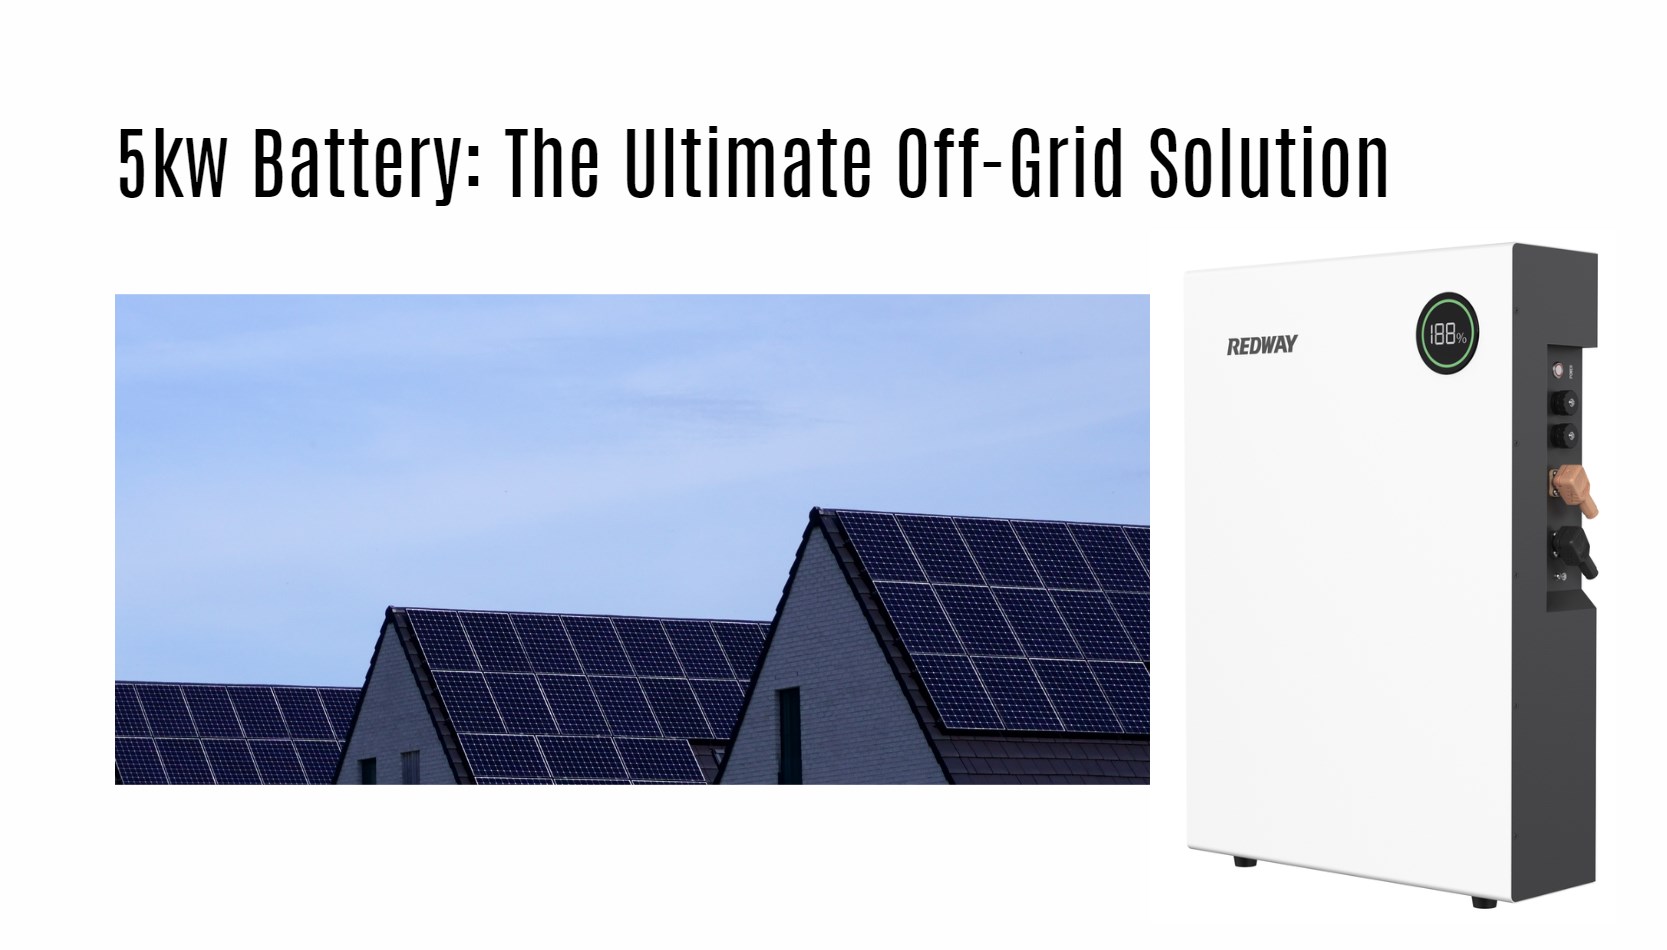 5kw Battery: The Ultimate Off-Grid Solution. 48v 100ah 5kwh home ess wall-mounted lithium battery factory manufacturer oem redway bluetooh